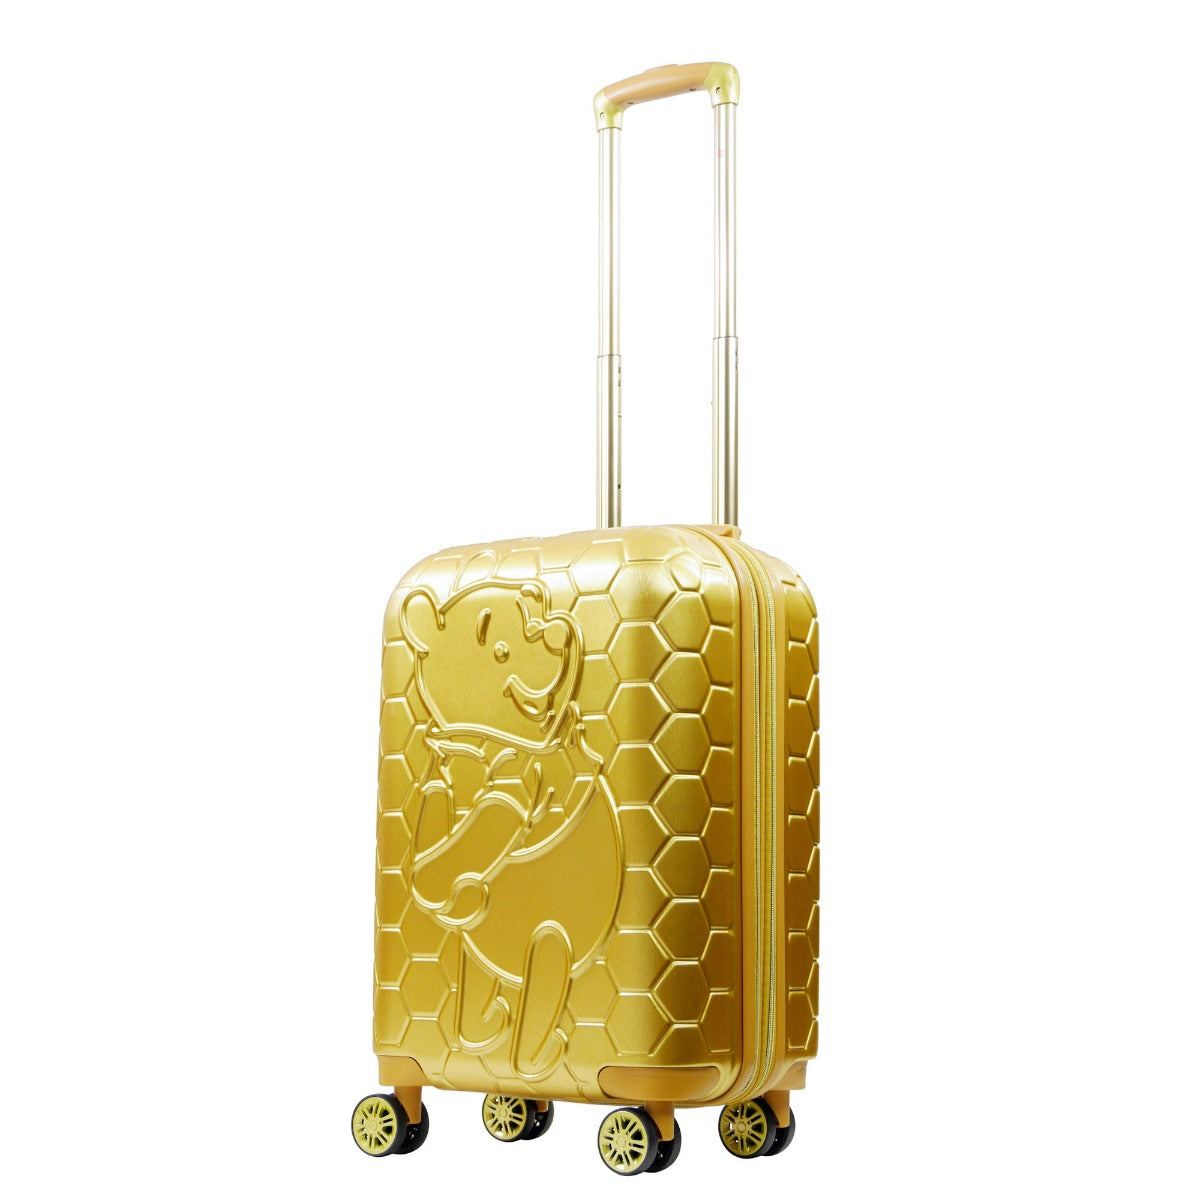 Gold Disney Winnie the Pooh 22.5" hardside spinner carry on luggage - best kids suitcase for travel